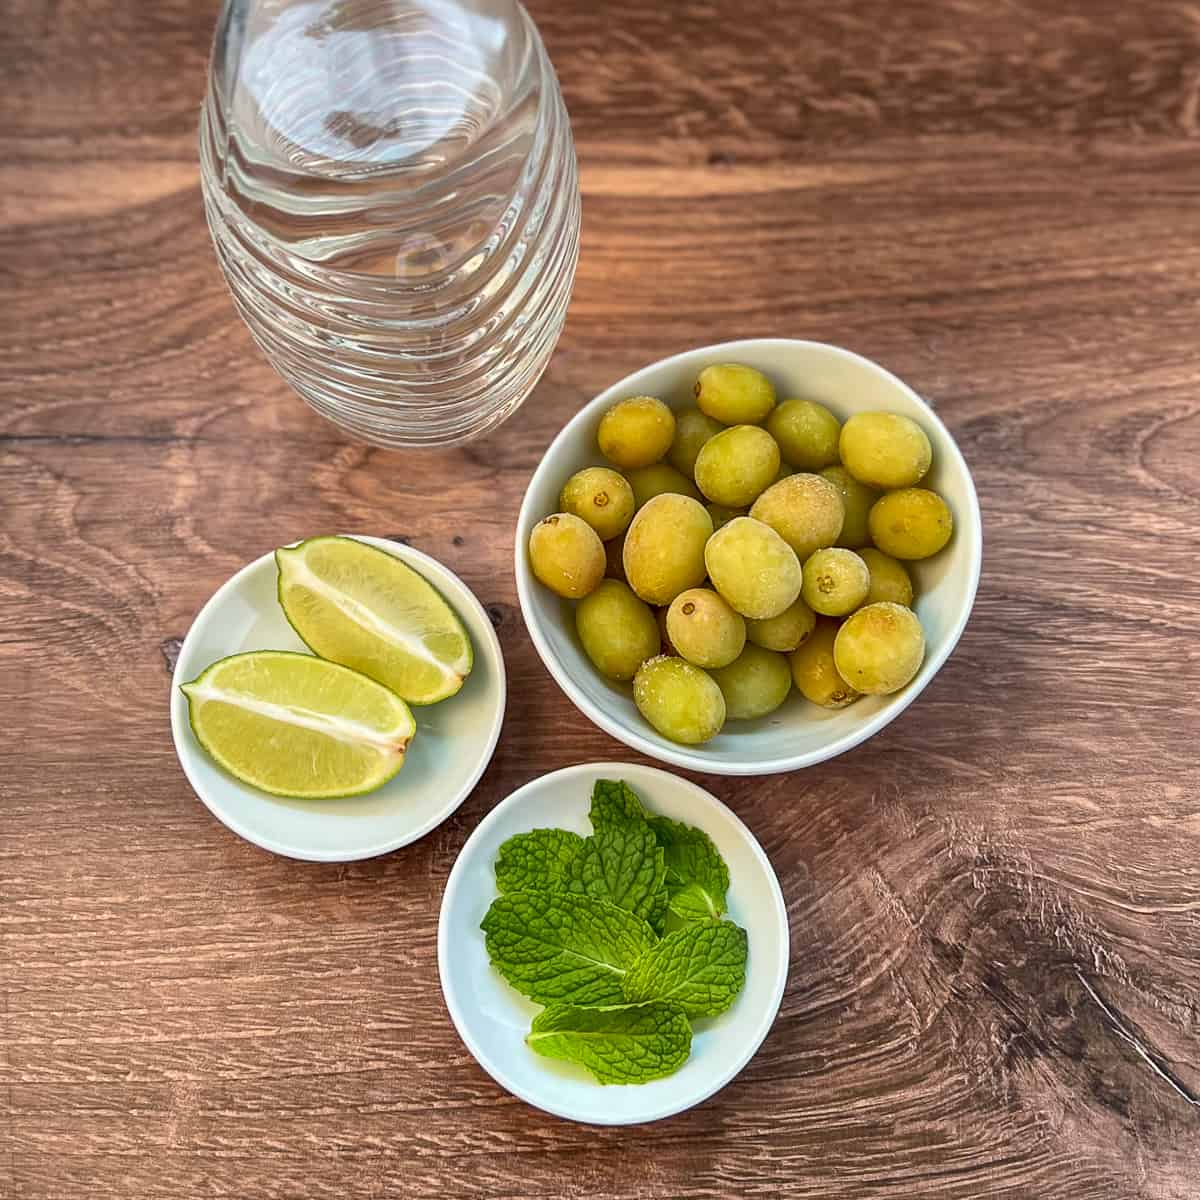 Key ingredients for healthy mojito mocktail: frozen green grapes, fresh mint, fresh lime and sparkling water.